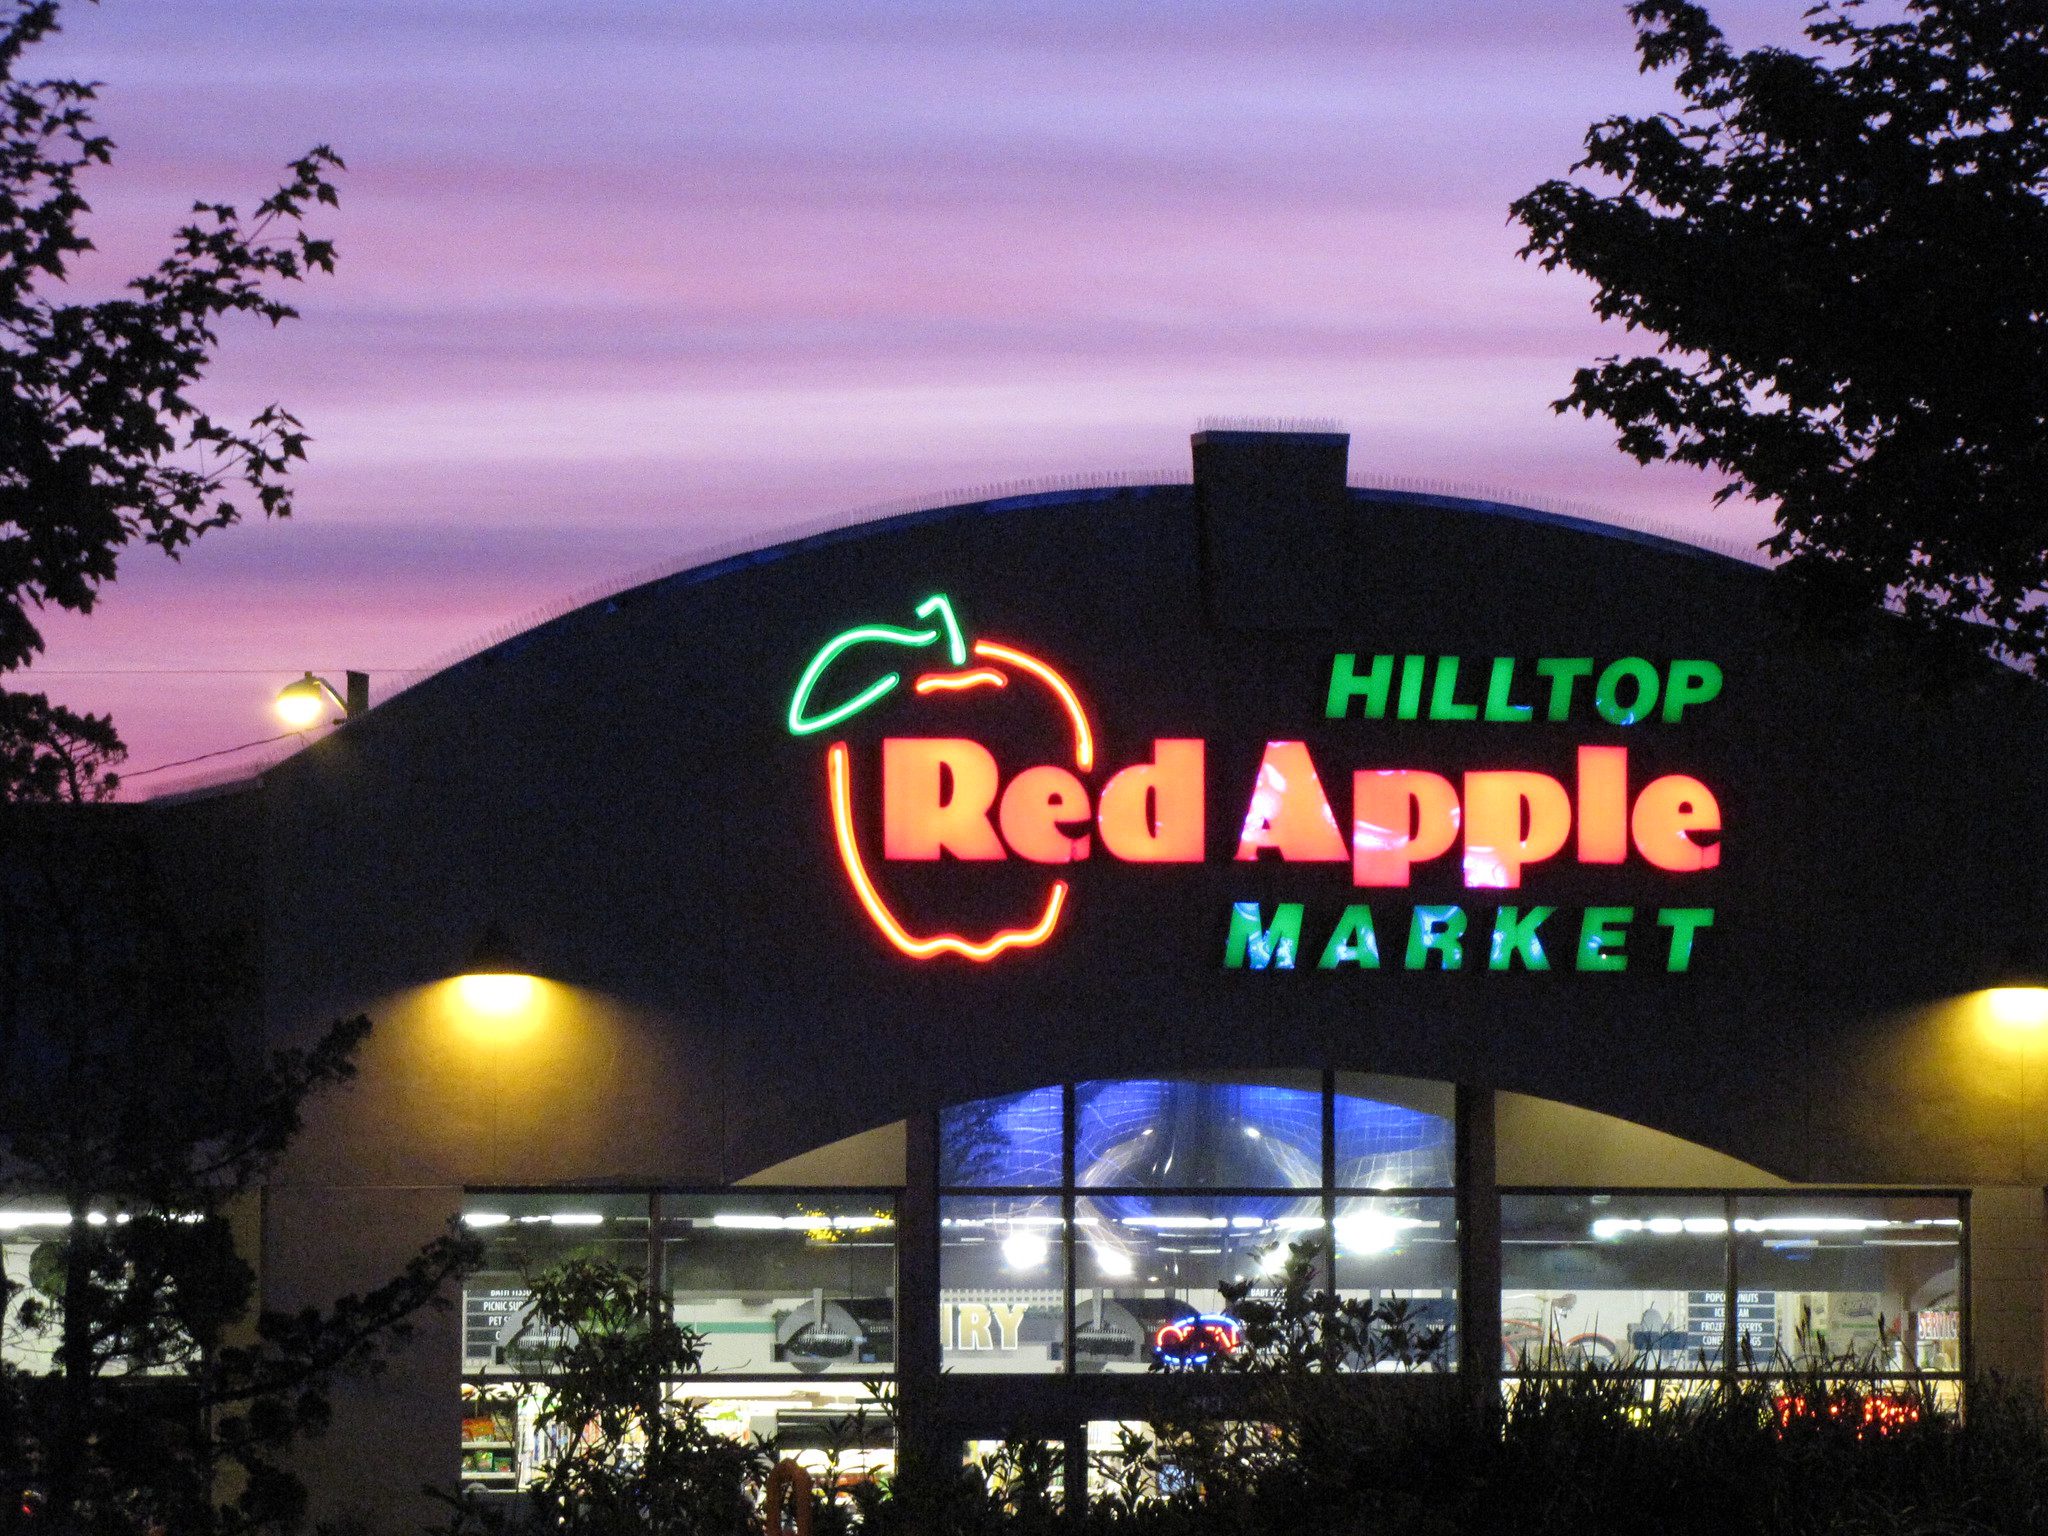 Photo of the Hilltop Red Apple Market on Beacon Hill in the late evening. A large red apple neon light illuminates the lettering of the grocery store, with views inside as it gets dark out.